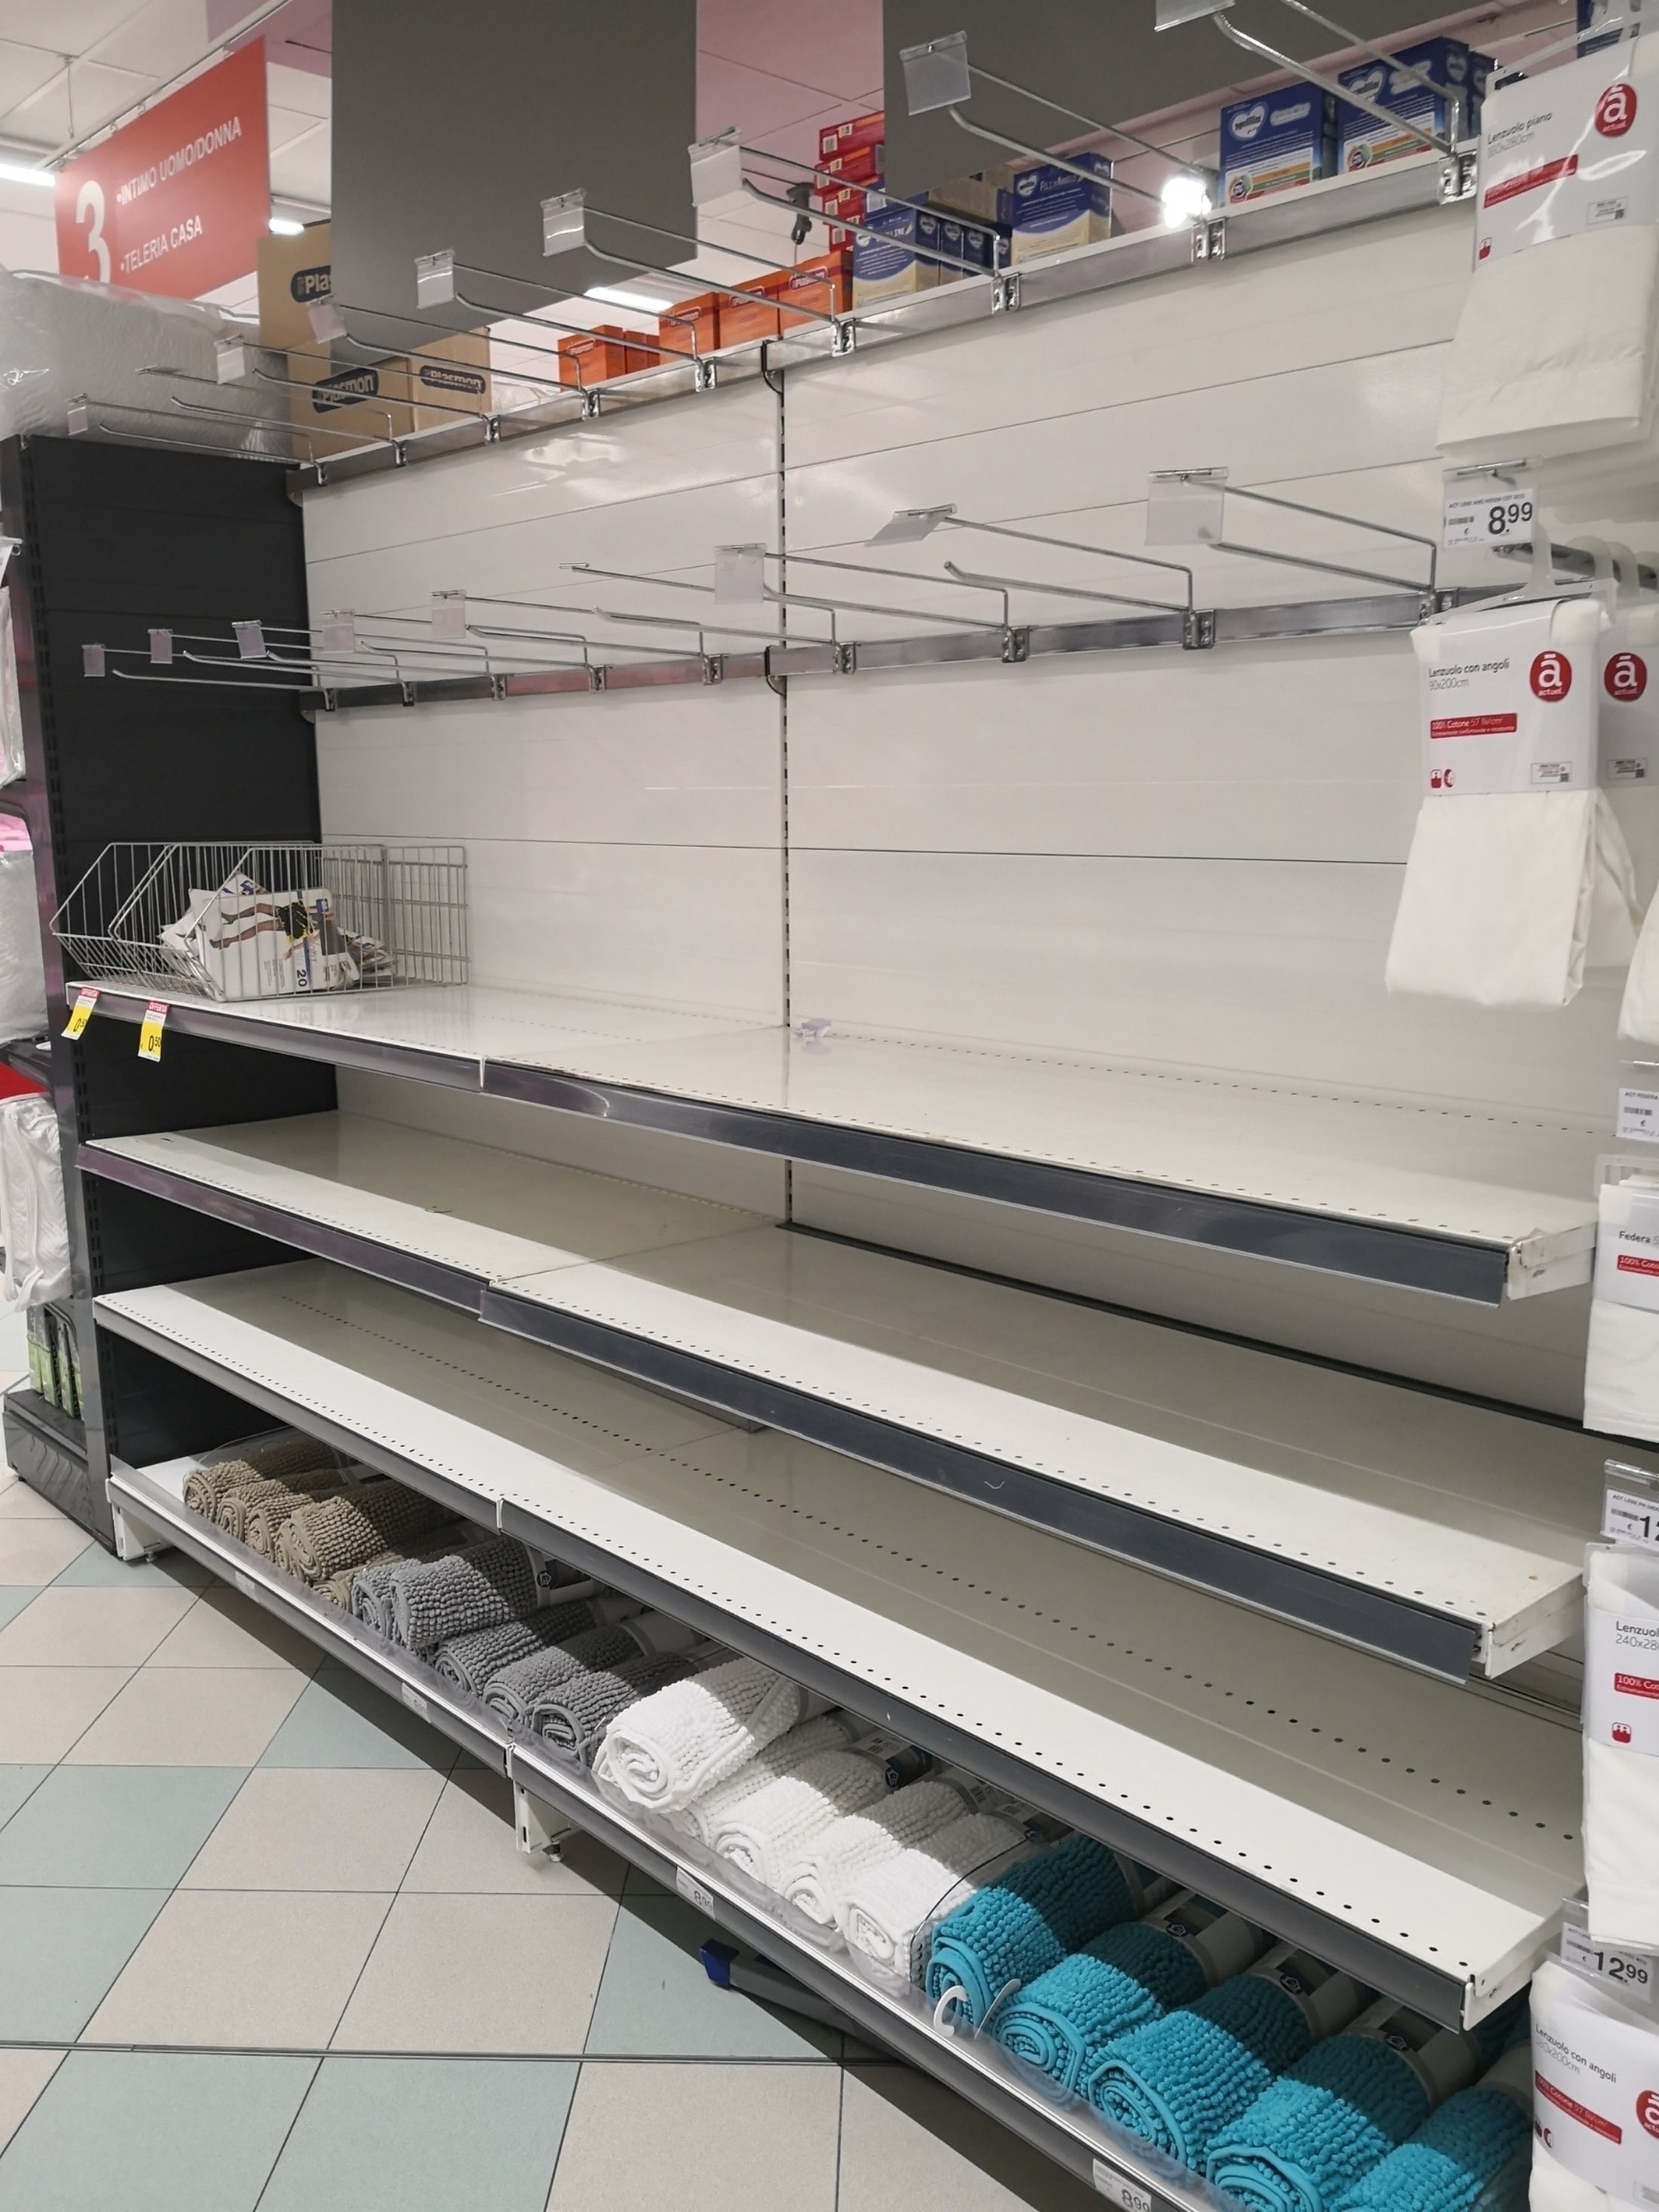 ITALY, ITALY  - *EXCLUSIVE*  - Empty shelfs as shoppers in the supermarket shop for fear of coronavirus in Italy.

A fifth person has died from coronavirus in Italy, where cases have soared over 200 - A dozen towns in Italy are in lockdown as authorities race to contain the biggest outbreak of coronavirus in Europe.

BACKGRID UK 23 FEBRUARY 2020, Image: 500675861, License: Rights-managed, Restrictions: RIGHTS: WORLDWIDE EXCEPT IN ITALY, Model Release: no, Credit line: Spot / BACKGRID / Backgrid UK / Profimedia